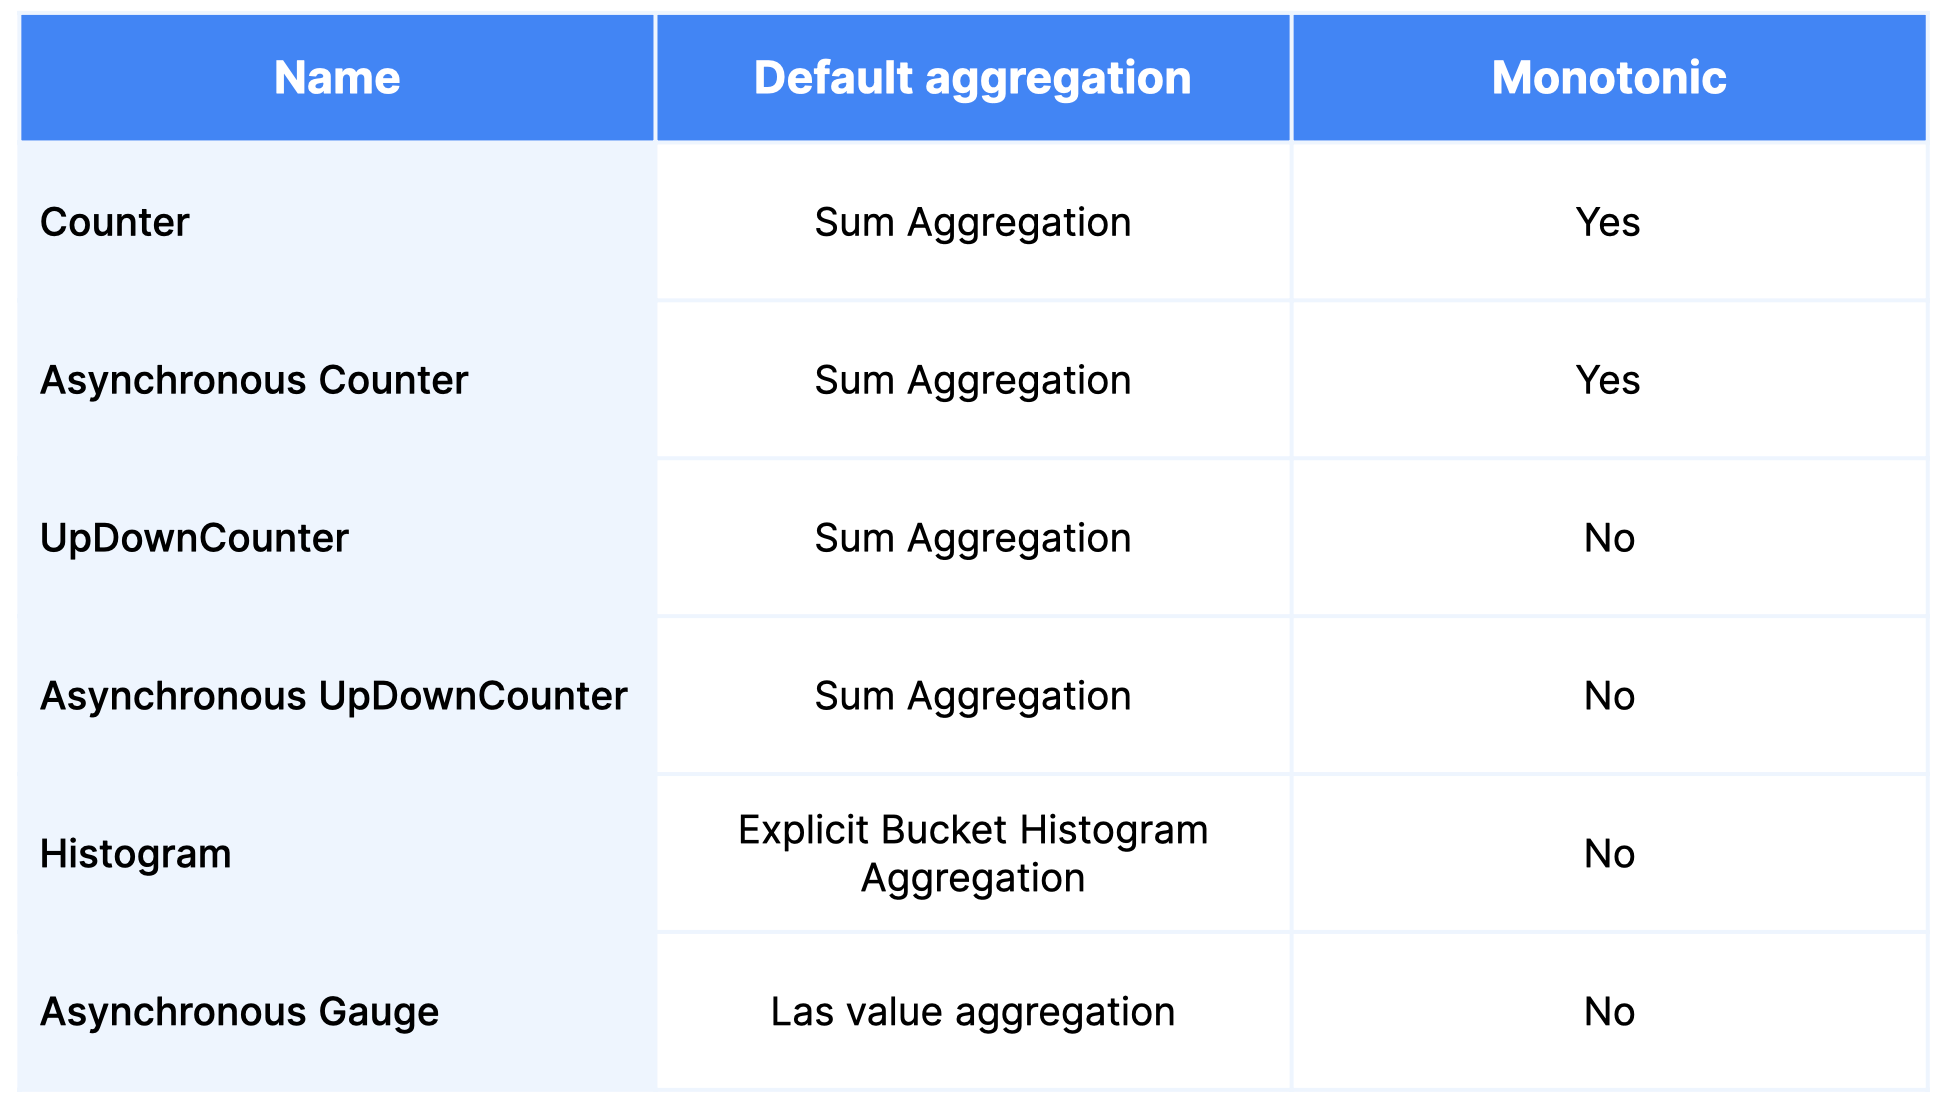 Table outlining the default aggregation for each OpenTelemetry instrument type.